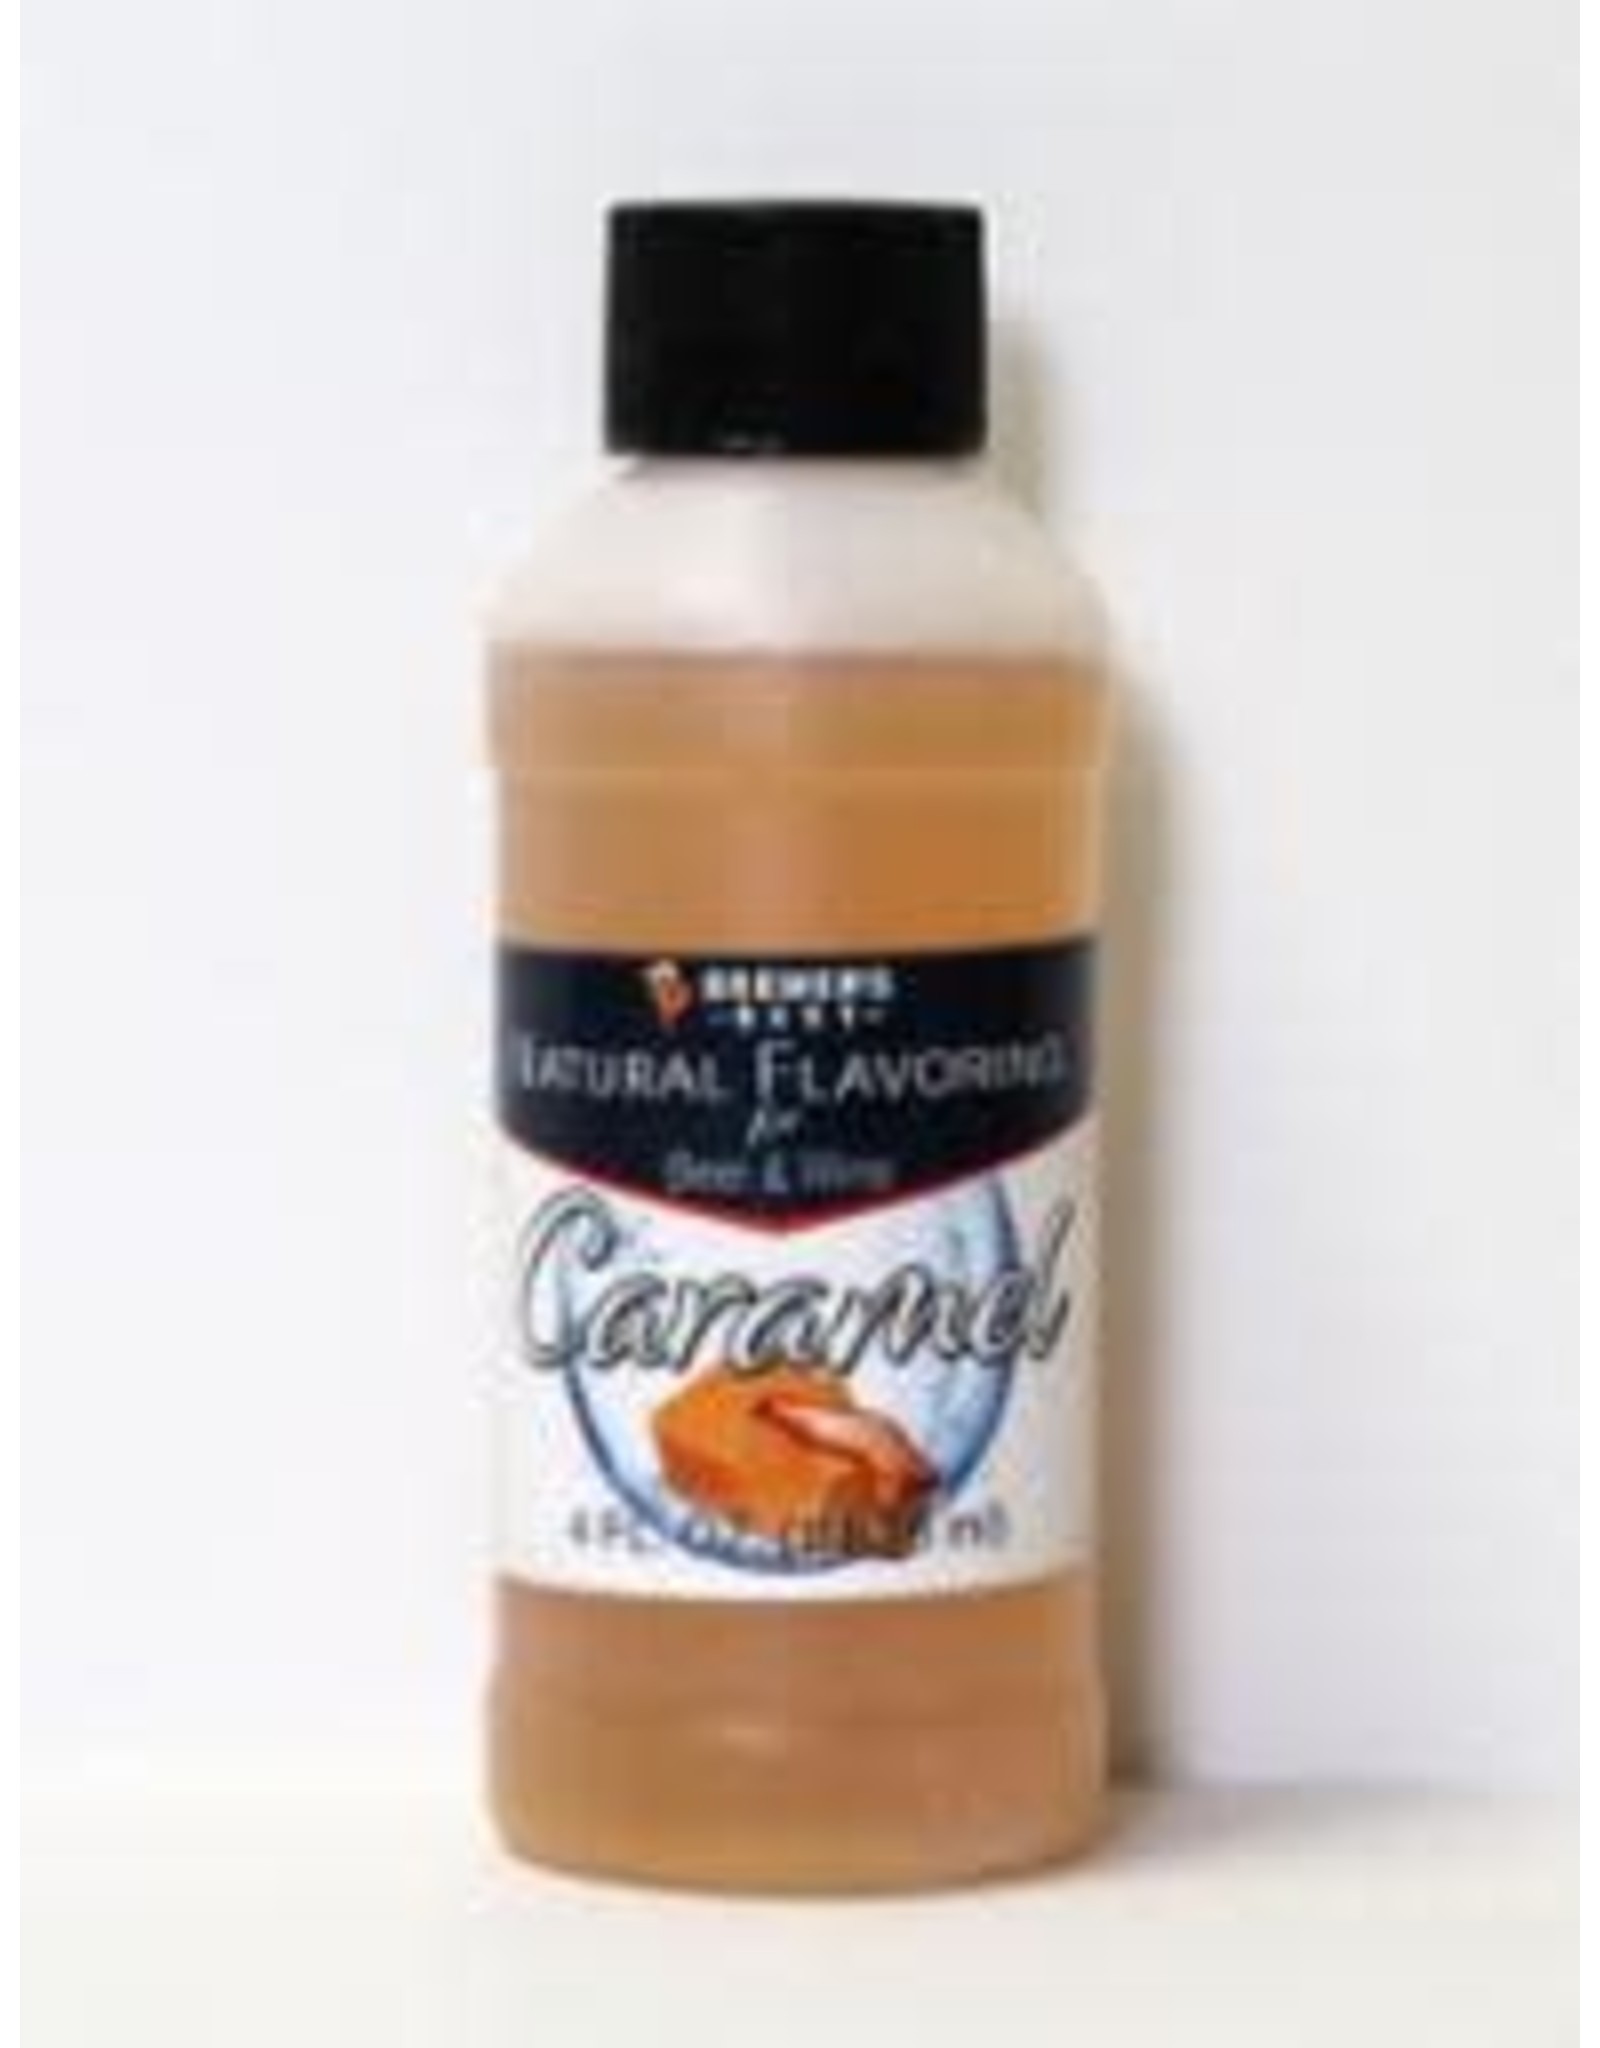 Brewer's Best All natural extract 4 oz Caramel